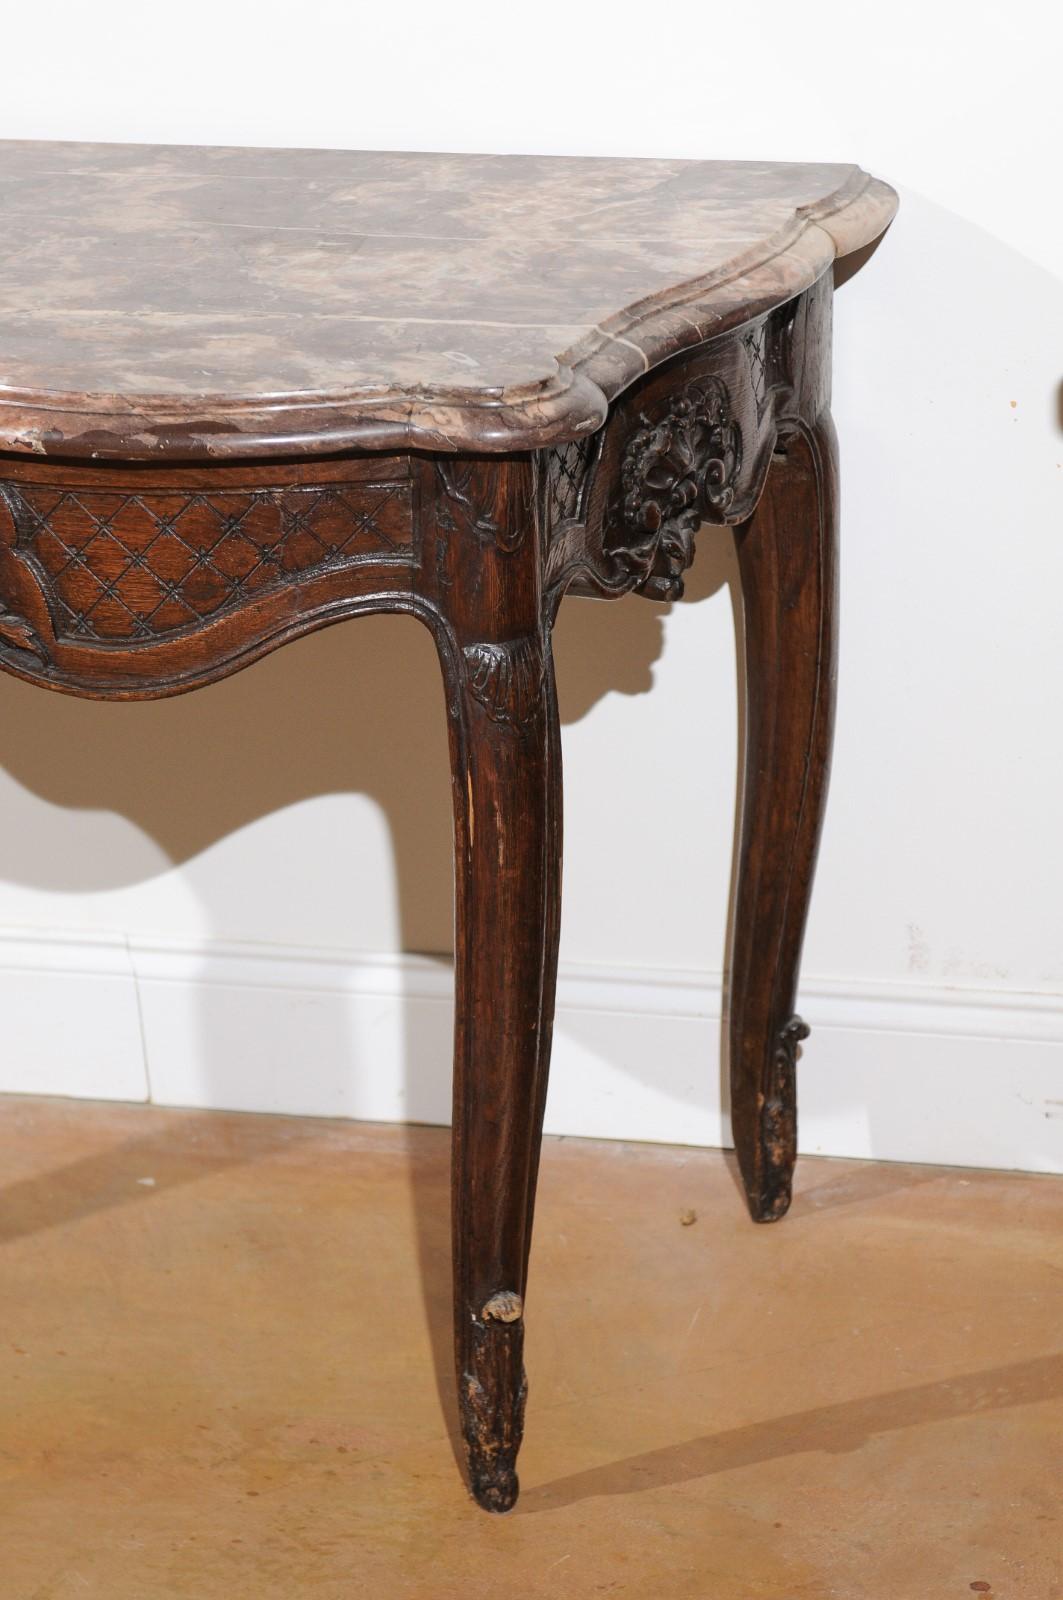 French 1720s Régence Period Walnut Console Table with Original Marble Top For Sale 2